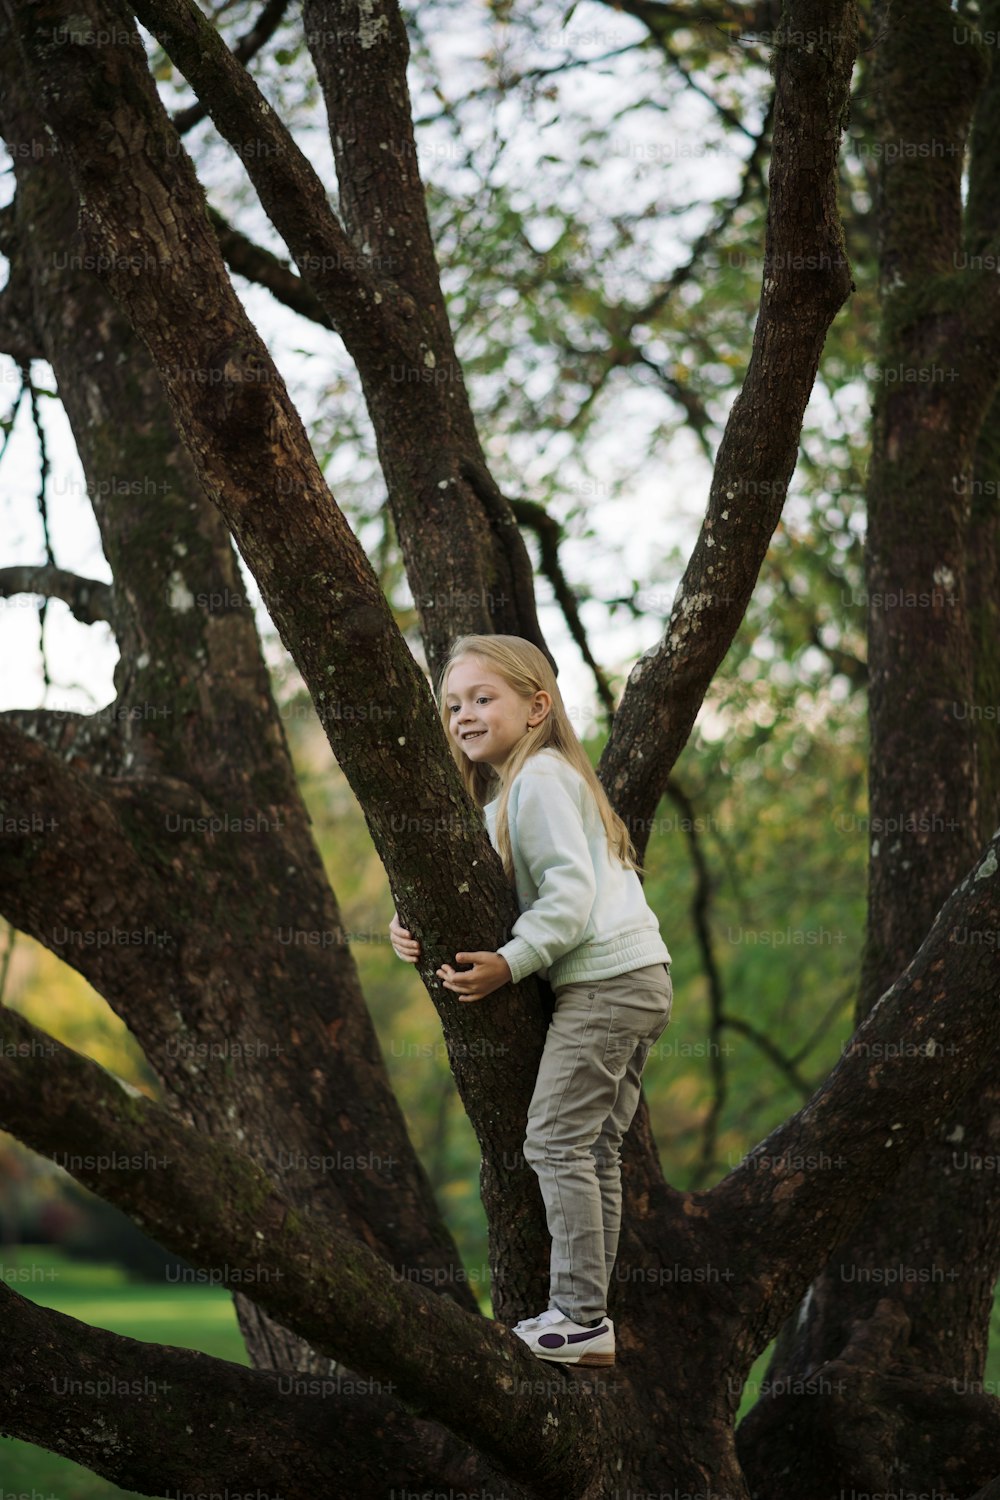 a young girl climbing up a tree in a park